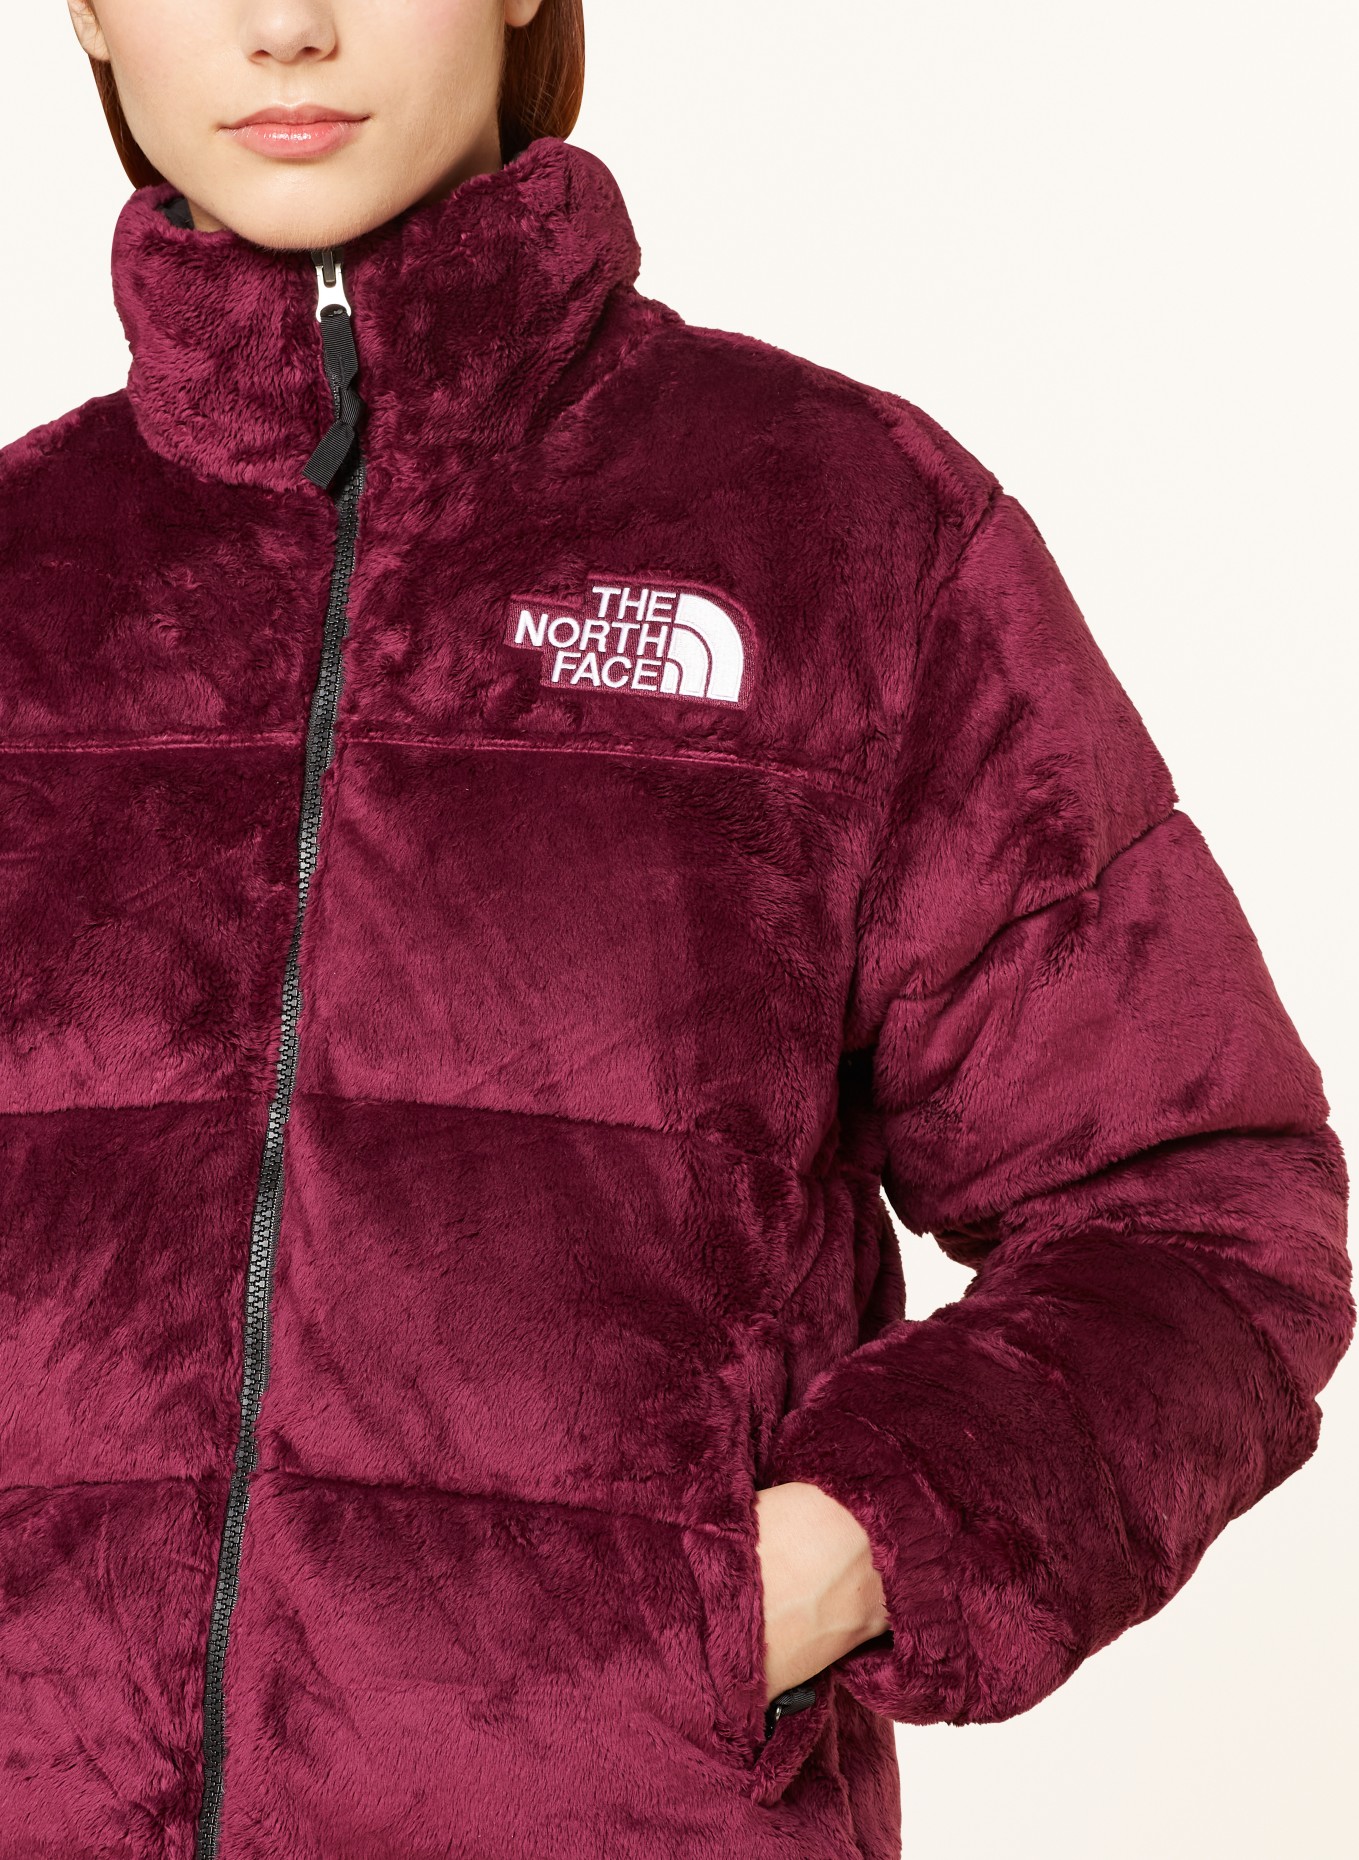 THE NORTH FACE Down jacket VERSA made of faux fur, Color: FUCHSIA (Image 4)